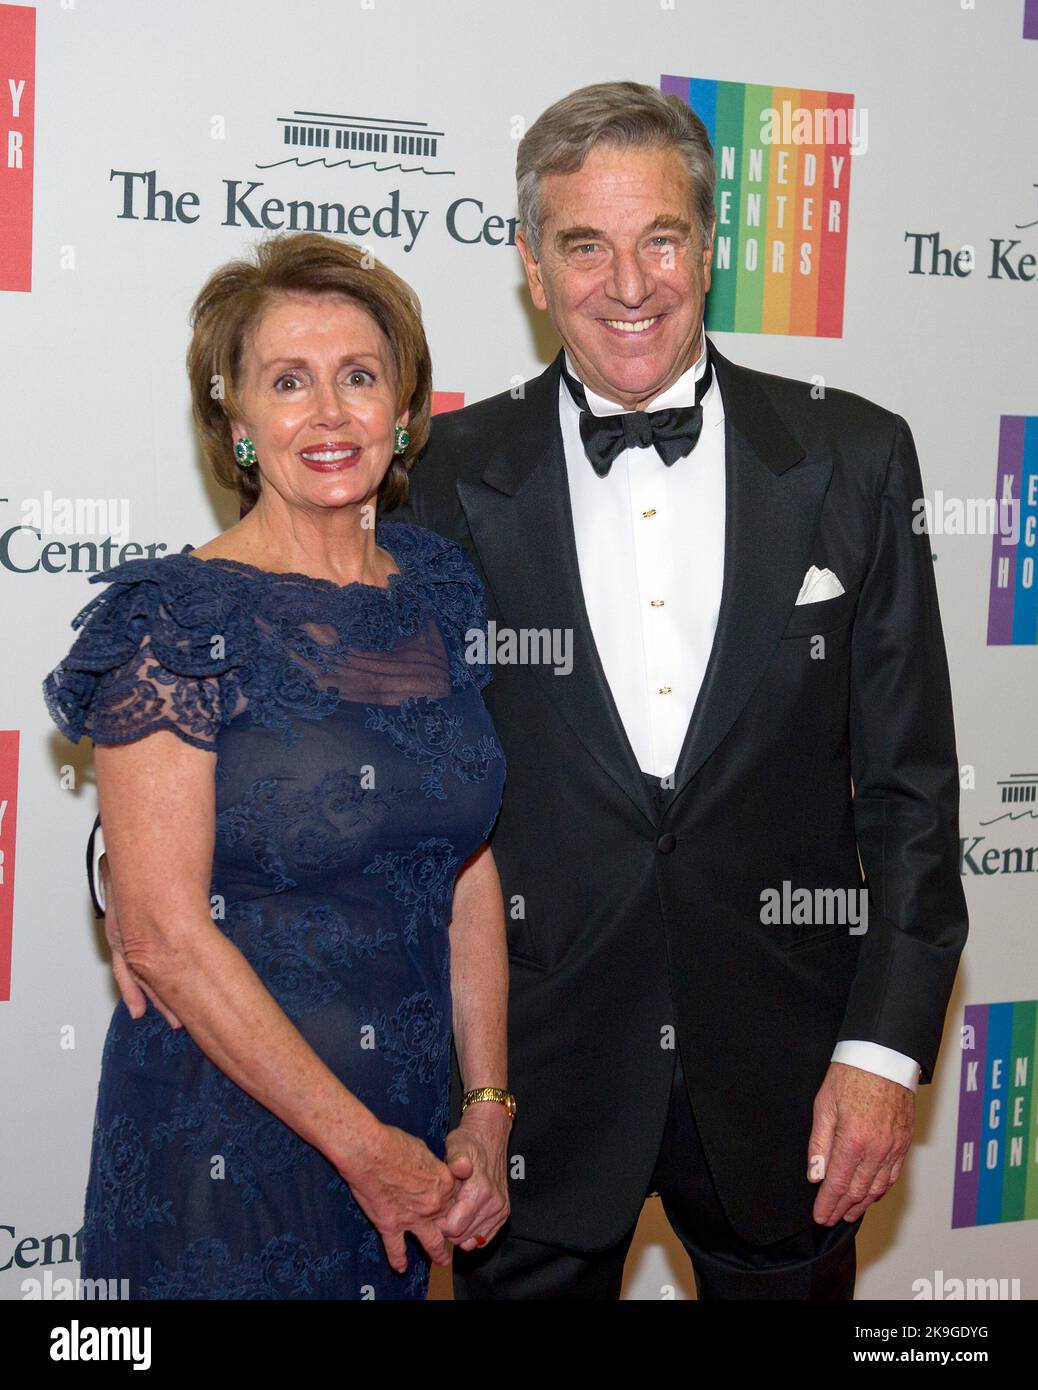 United States House Democratic Leader Nancy Pelosi (Democrat of California) and her husband, Paul, arrive for the formal Artist's Dinner honoring the recipients of the 2014 Kennedy Center Honors hosted by United States Secretary of State John F. Kerry at the U.S. Department of State in Washington, D.C. on Saturday, December 6, 2014. The 2014 honorees are: singer Al Green, actor and filmmaker Tom Hanks, ballerina Patricia McBride, singer-songwriter Sting, and comedienne Lily Tomlin.(Photo by Ron Sachs / Pool /Sipa USA) Stock Photo